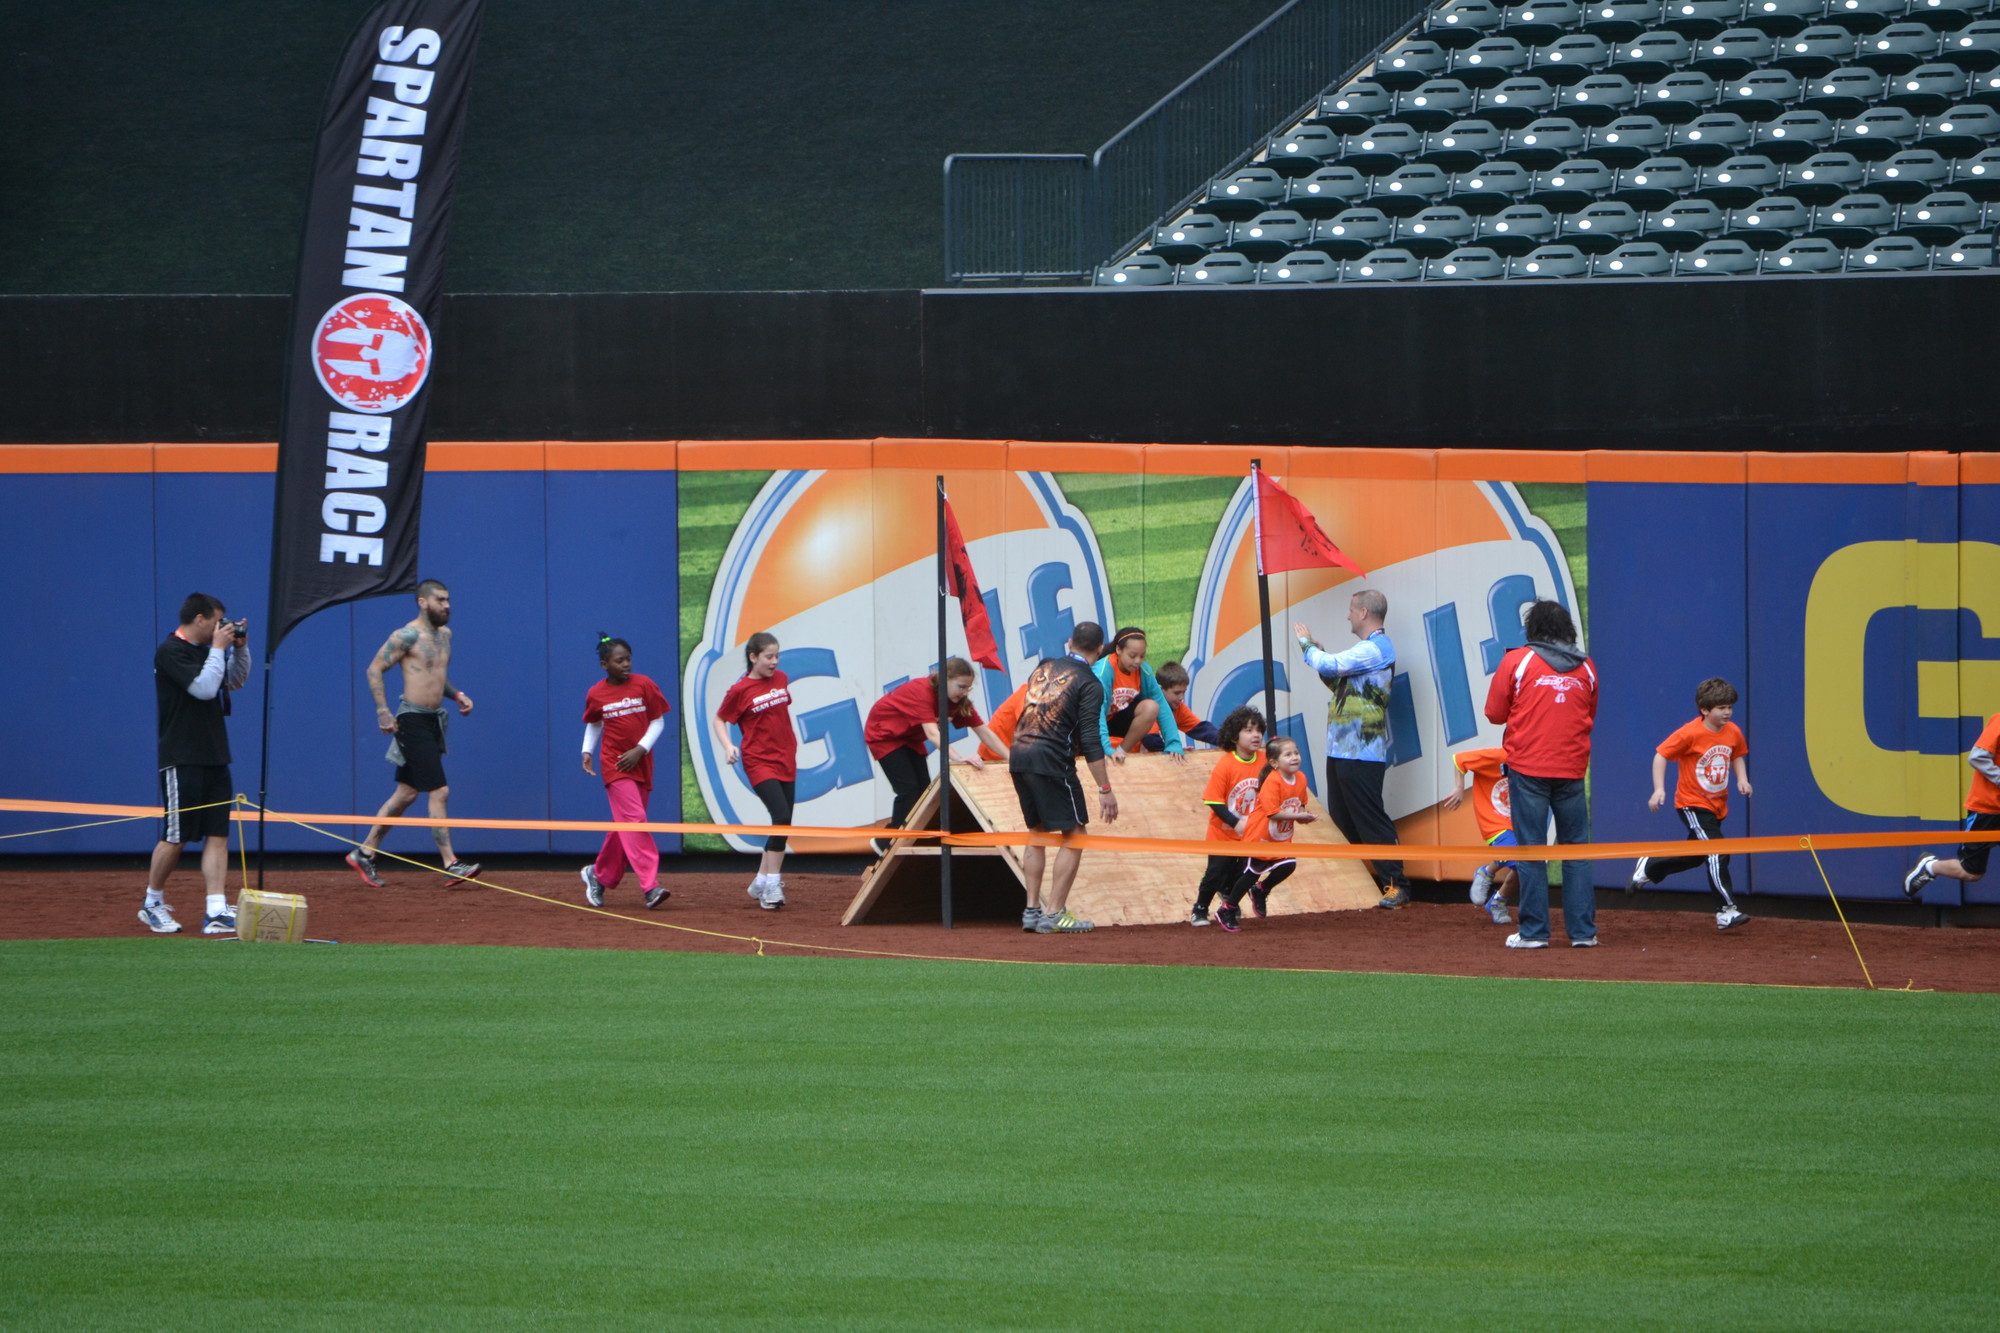 Students from Baldwin's Shunato Karate ran a one-mile “Spartan” race at CitiField on April 13.